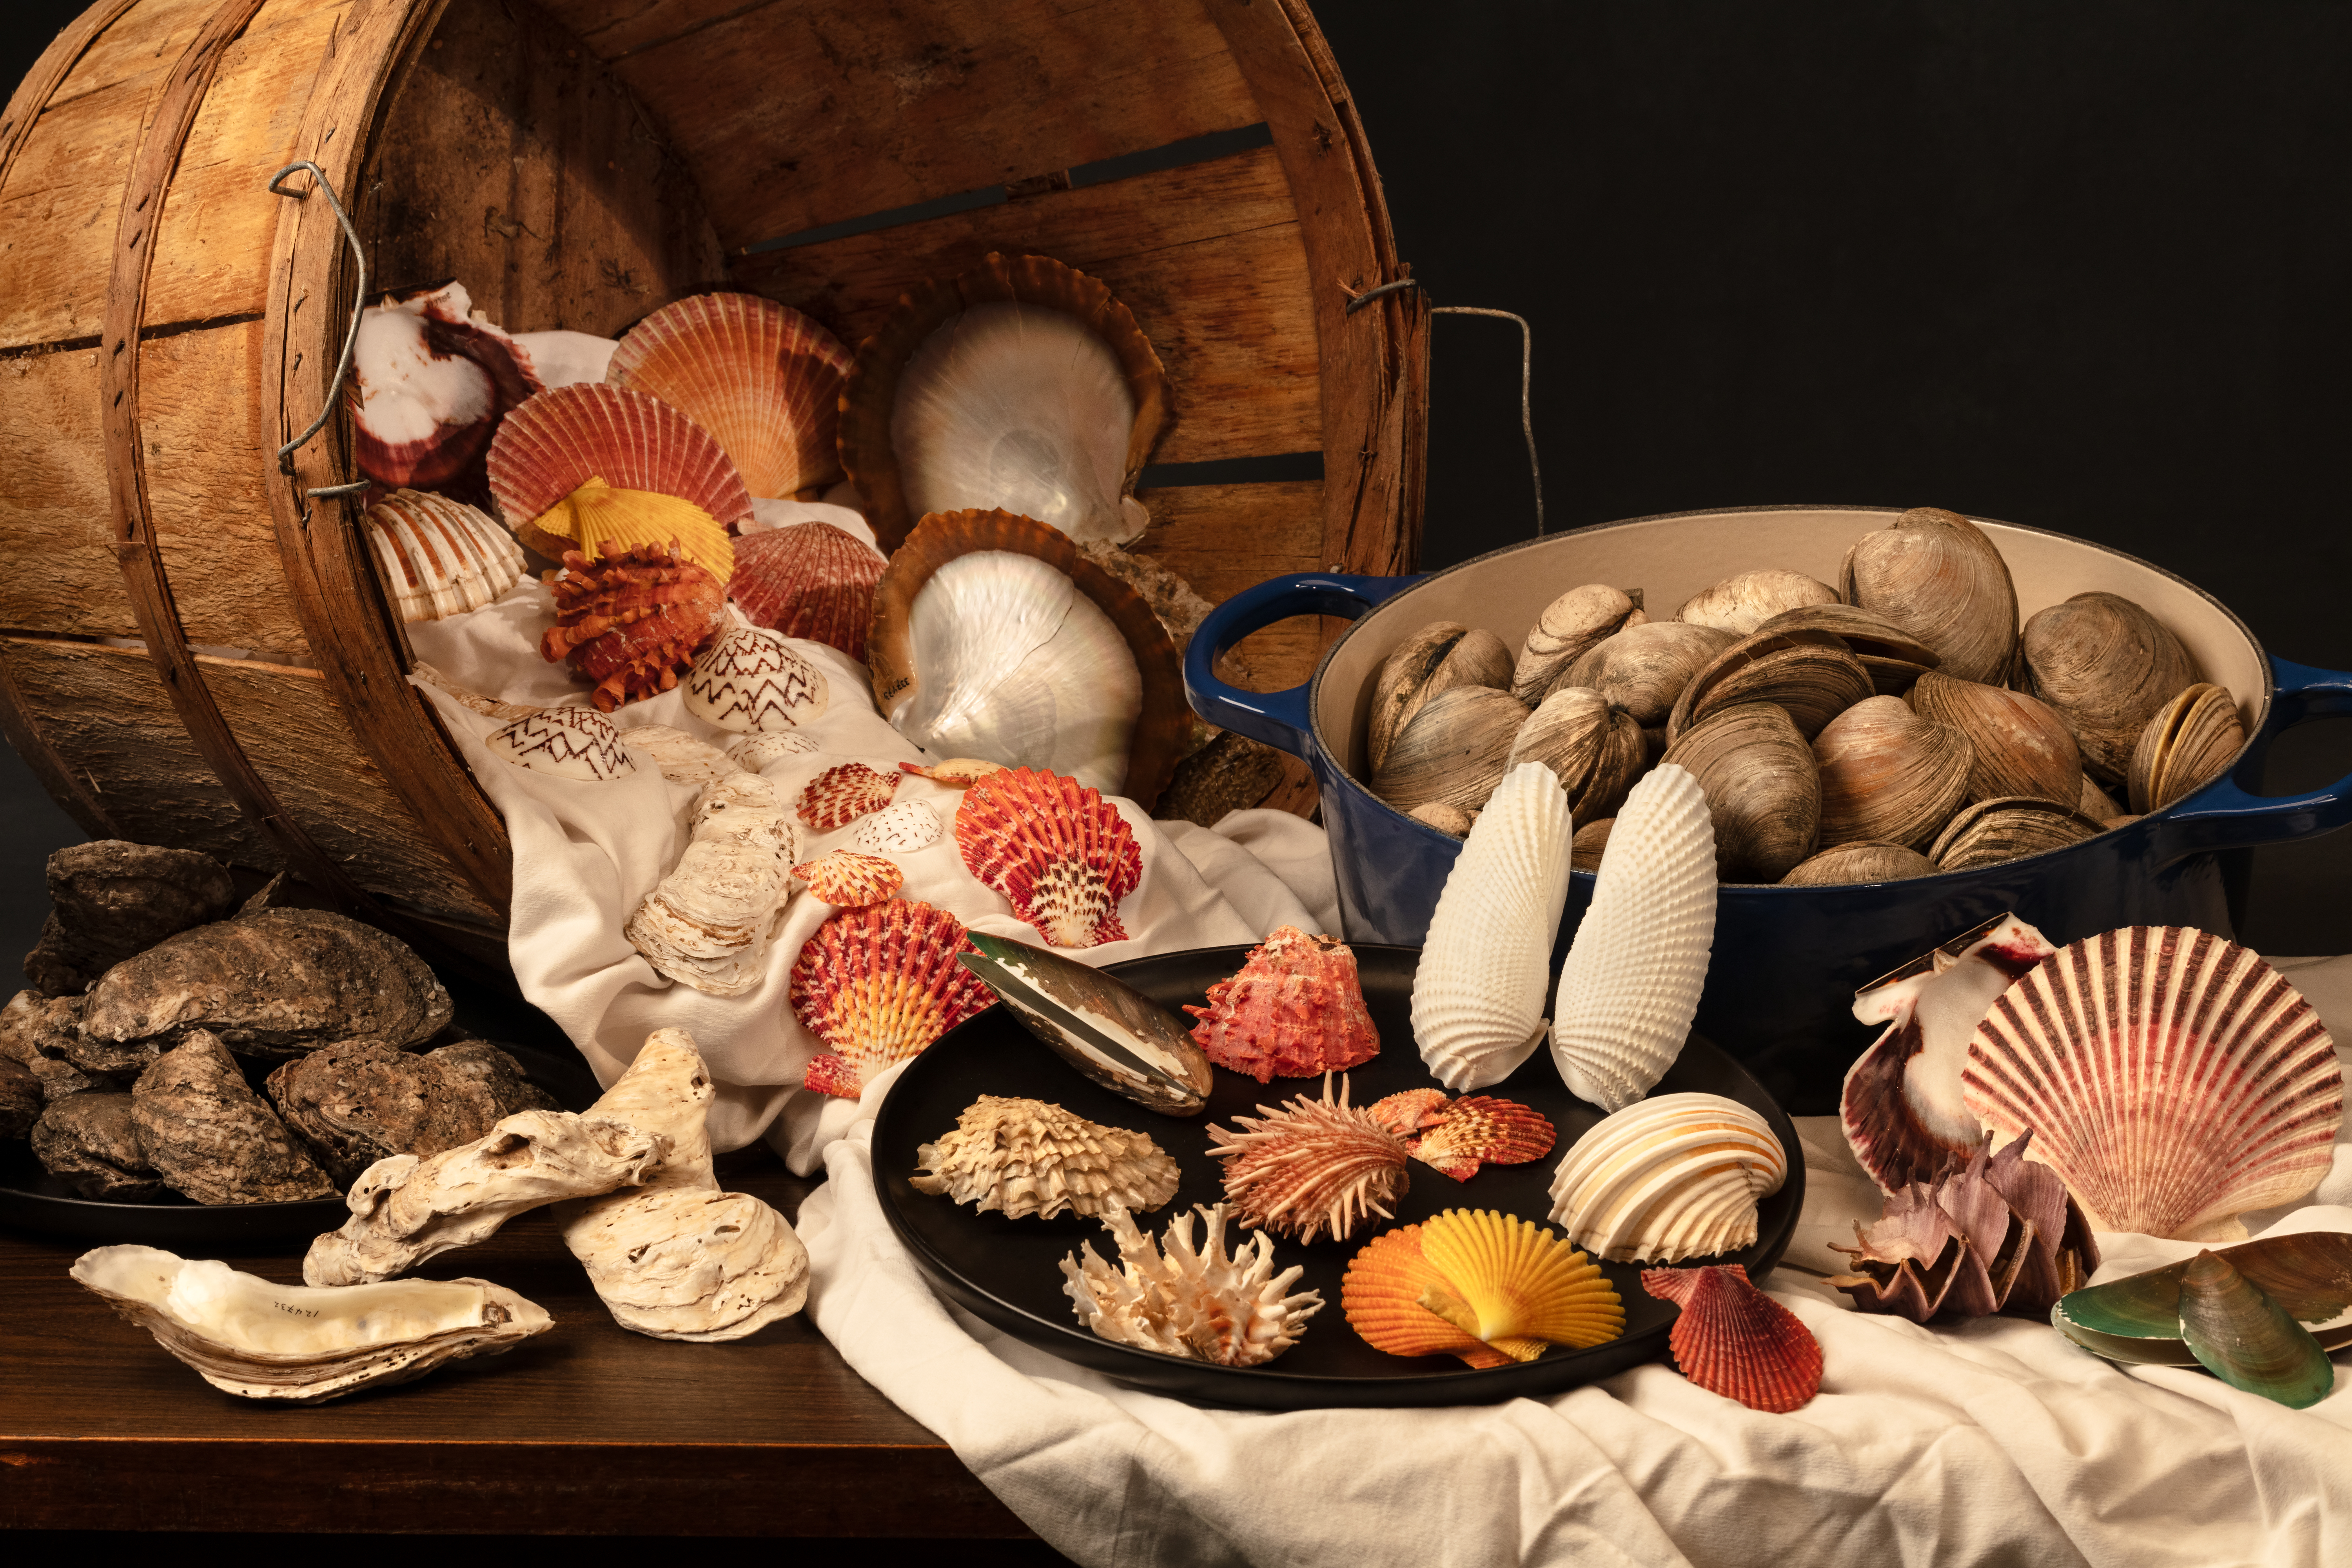 Still life photo of various clams and other bivalves spilling from a bushel basket